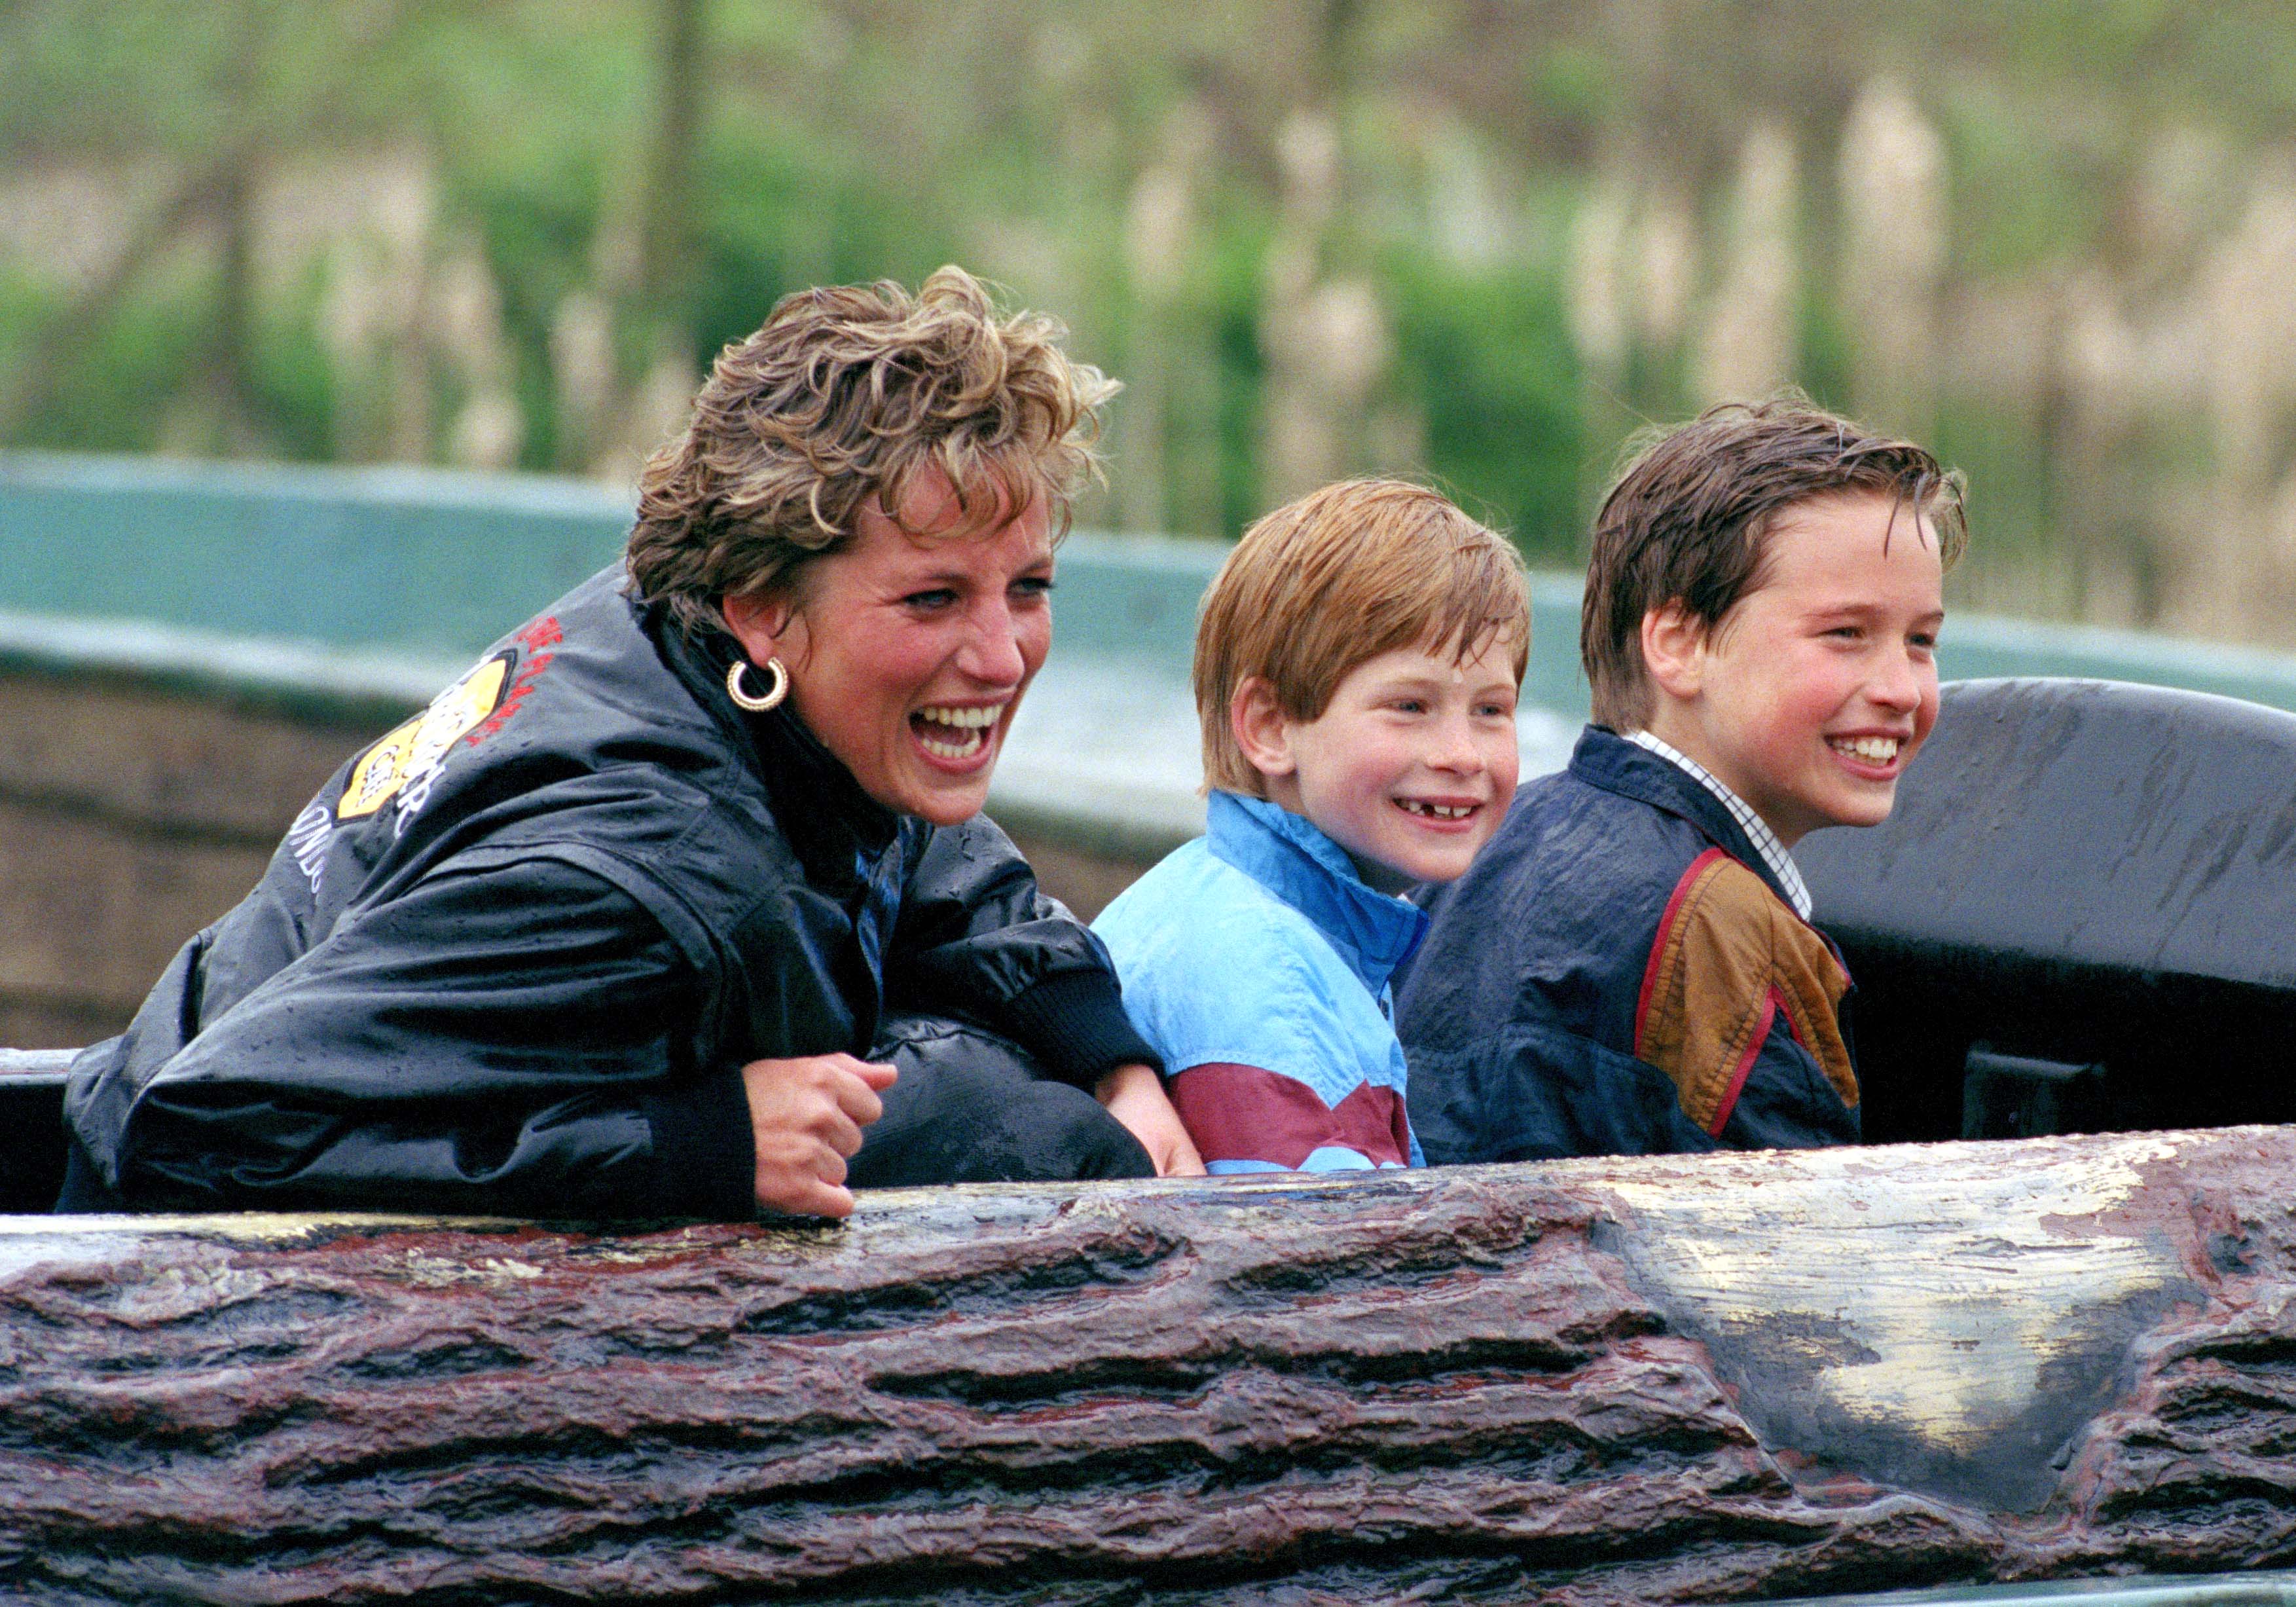 Princess Diana with sons Prince William and Prince Harry during their visit at The 'Thorpe Park' Amusement Park. / Source: Getty Images